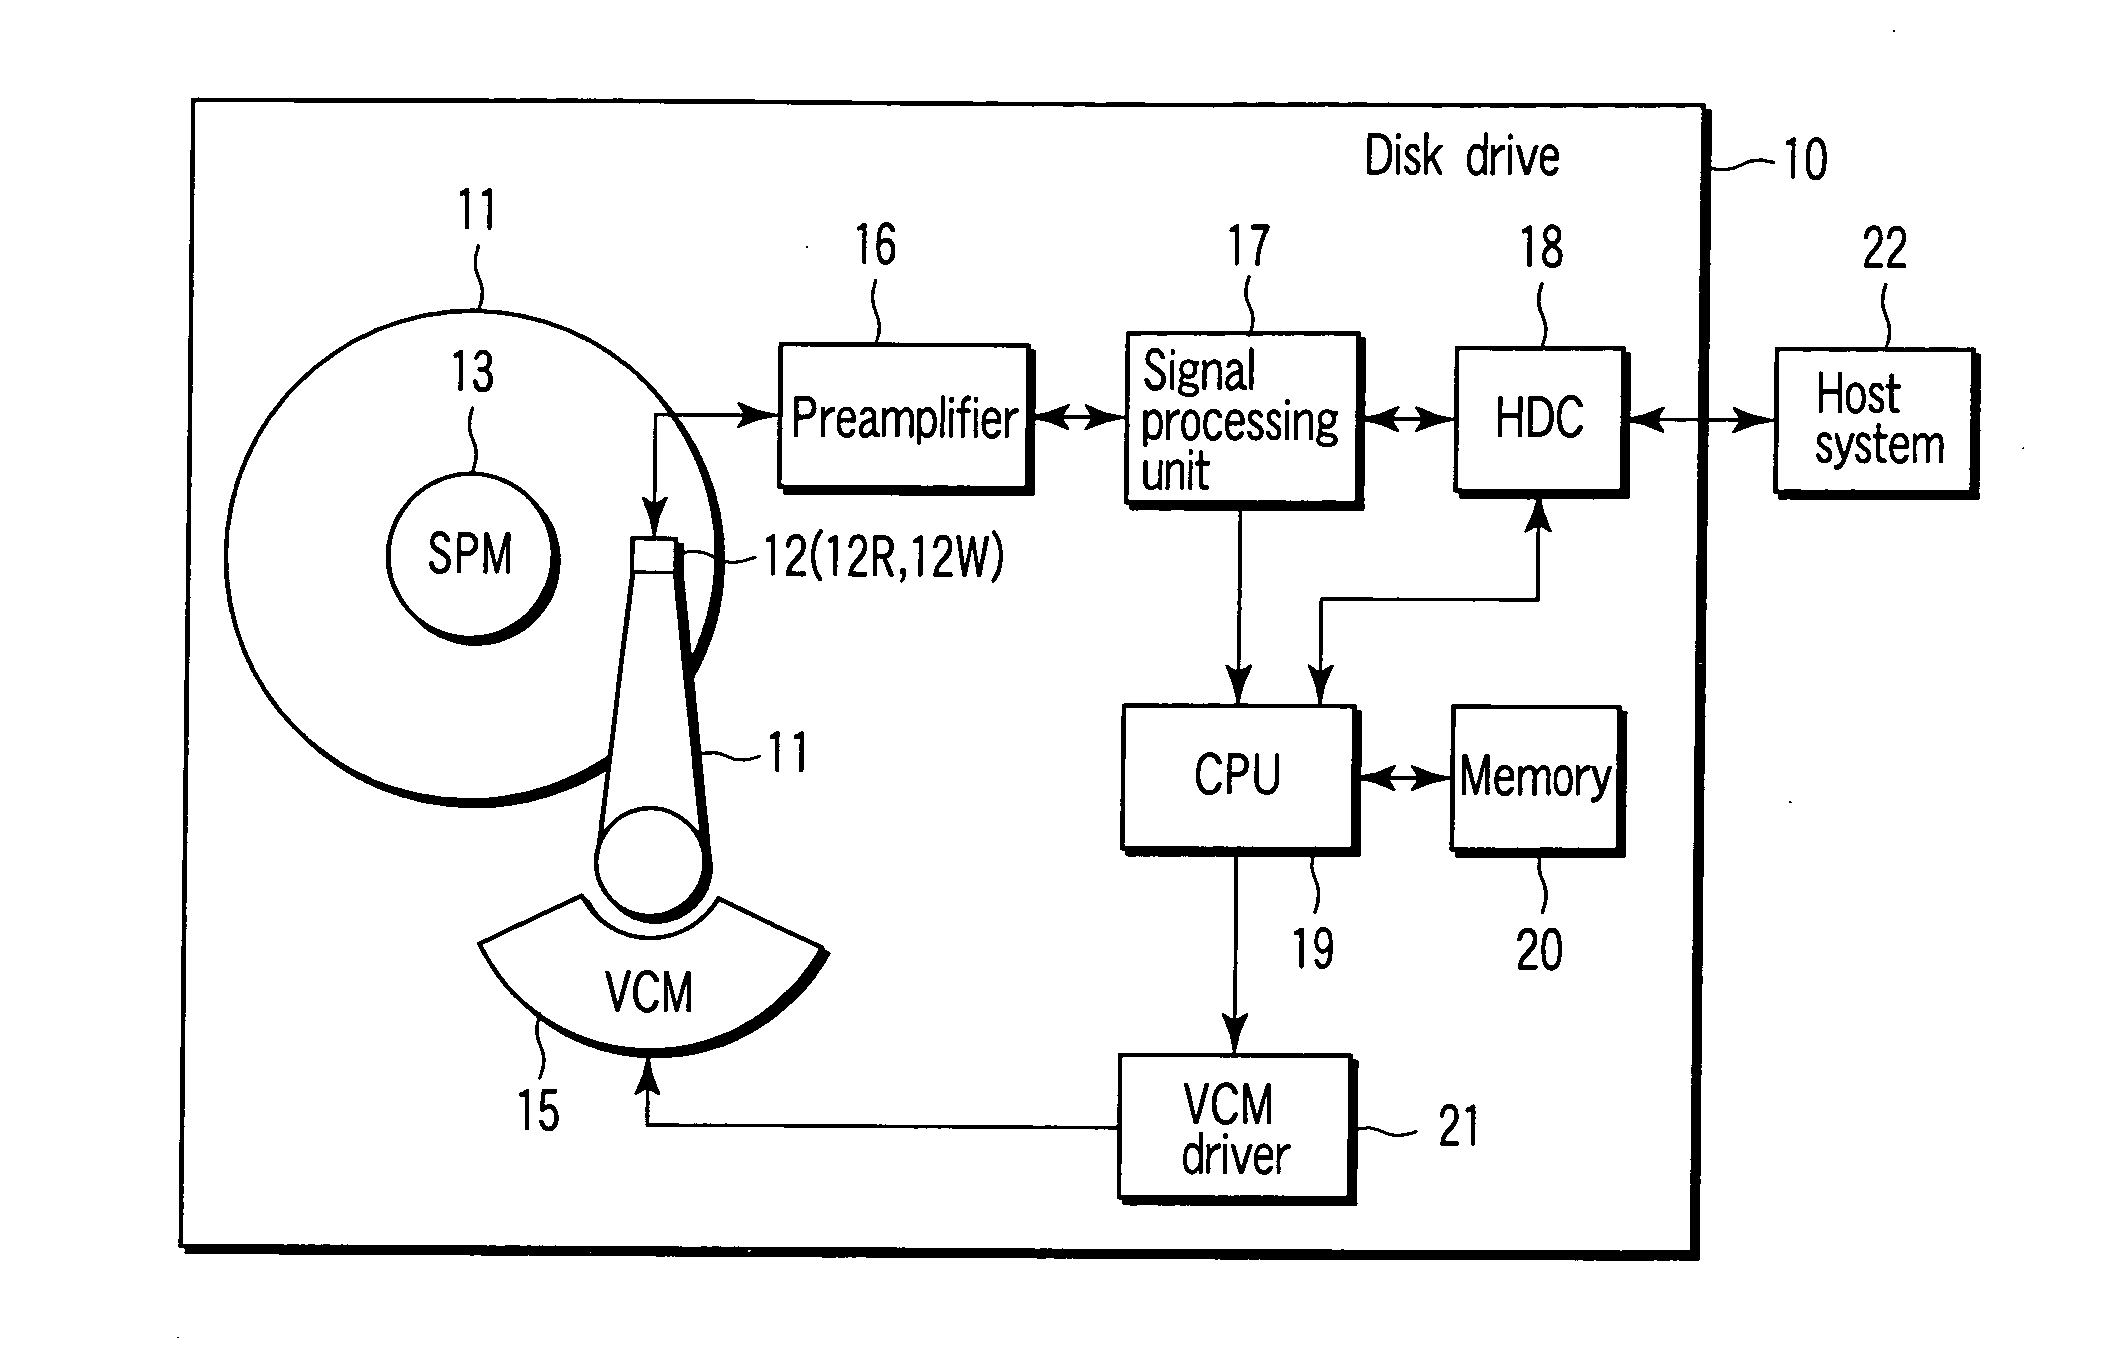 Disk drive having a magnetic head for perpendicular magnetic recording